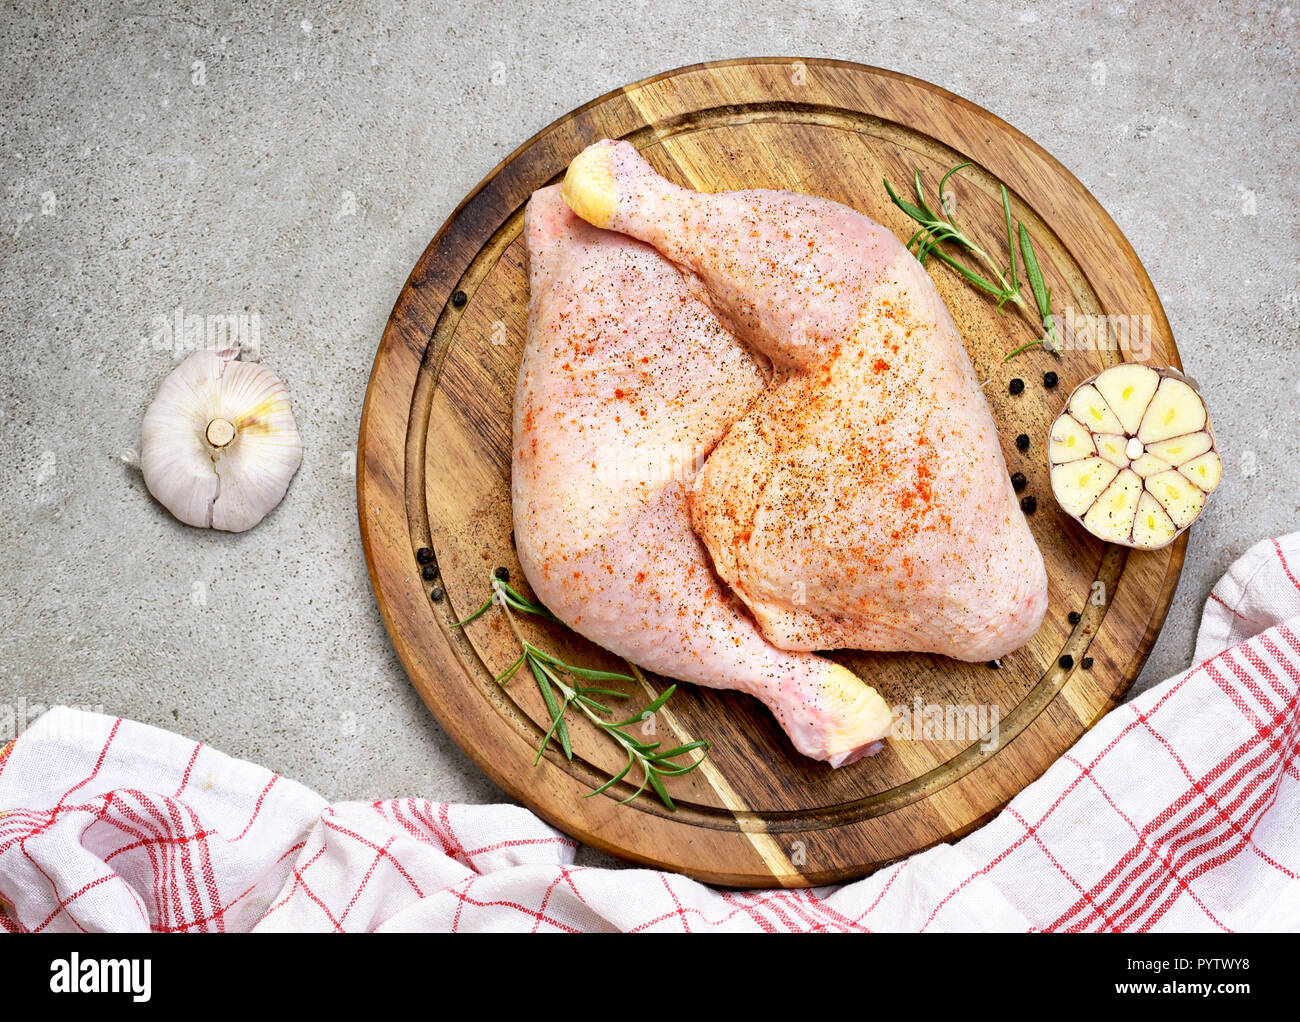 Delicious raw chicken legs or drumsticks on a wooden cutting board. Rustic preparation scene with garlic and raw meat. Stock Photo